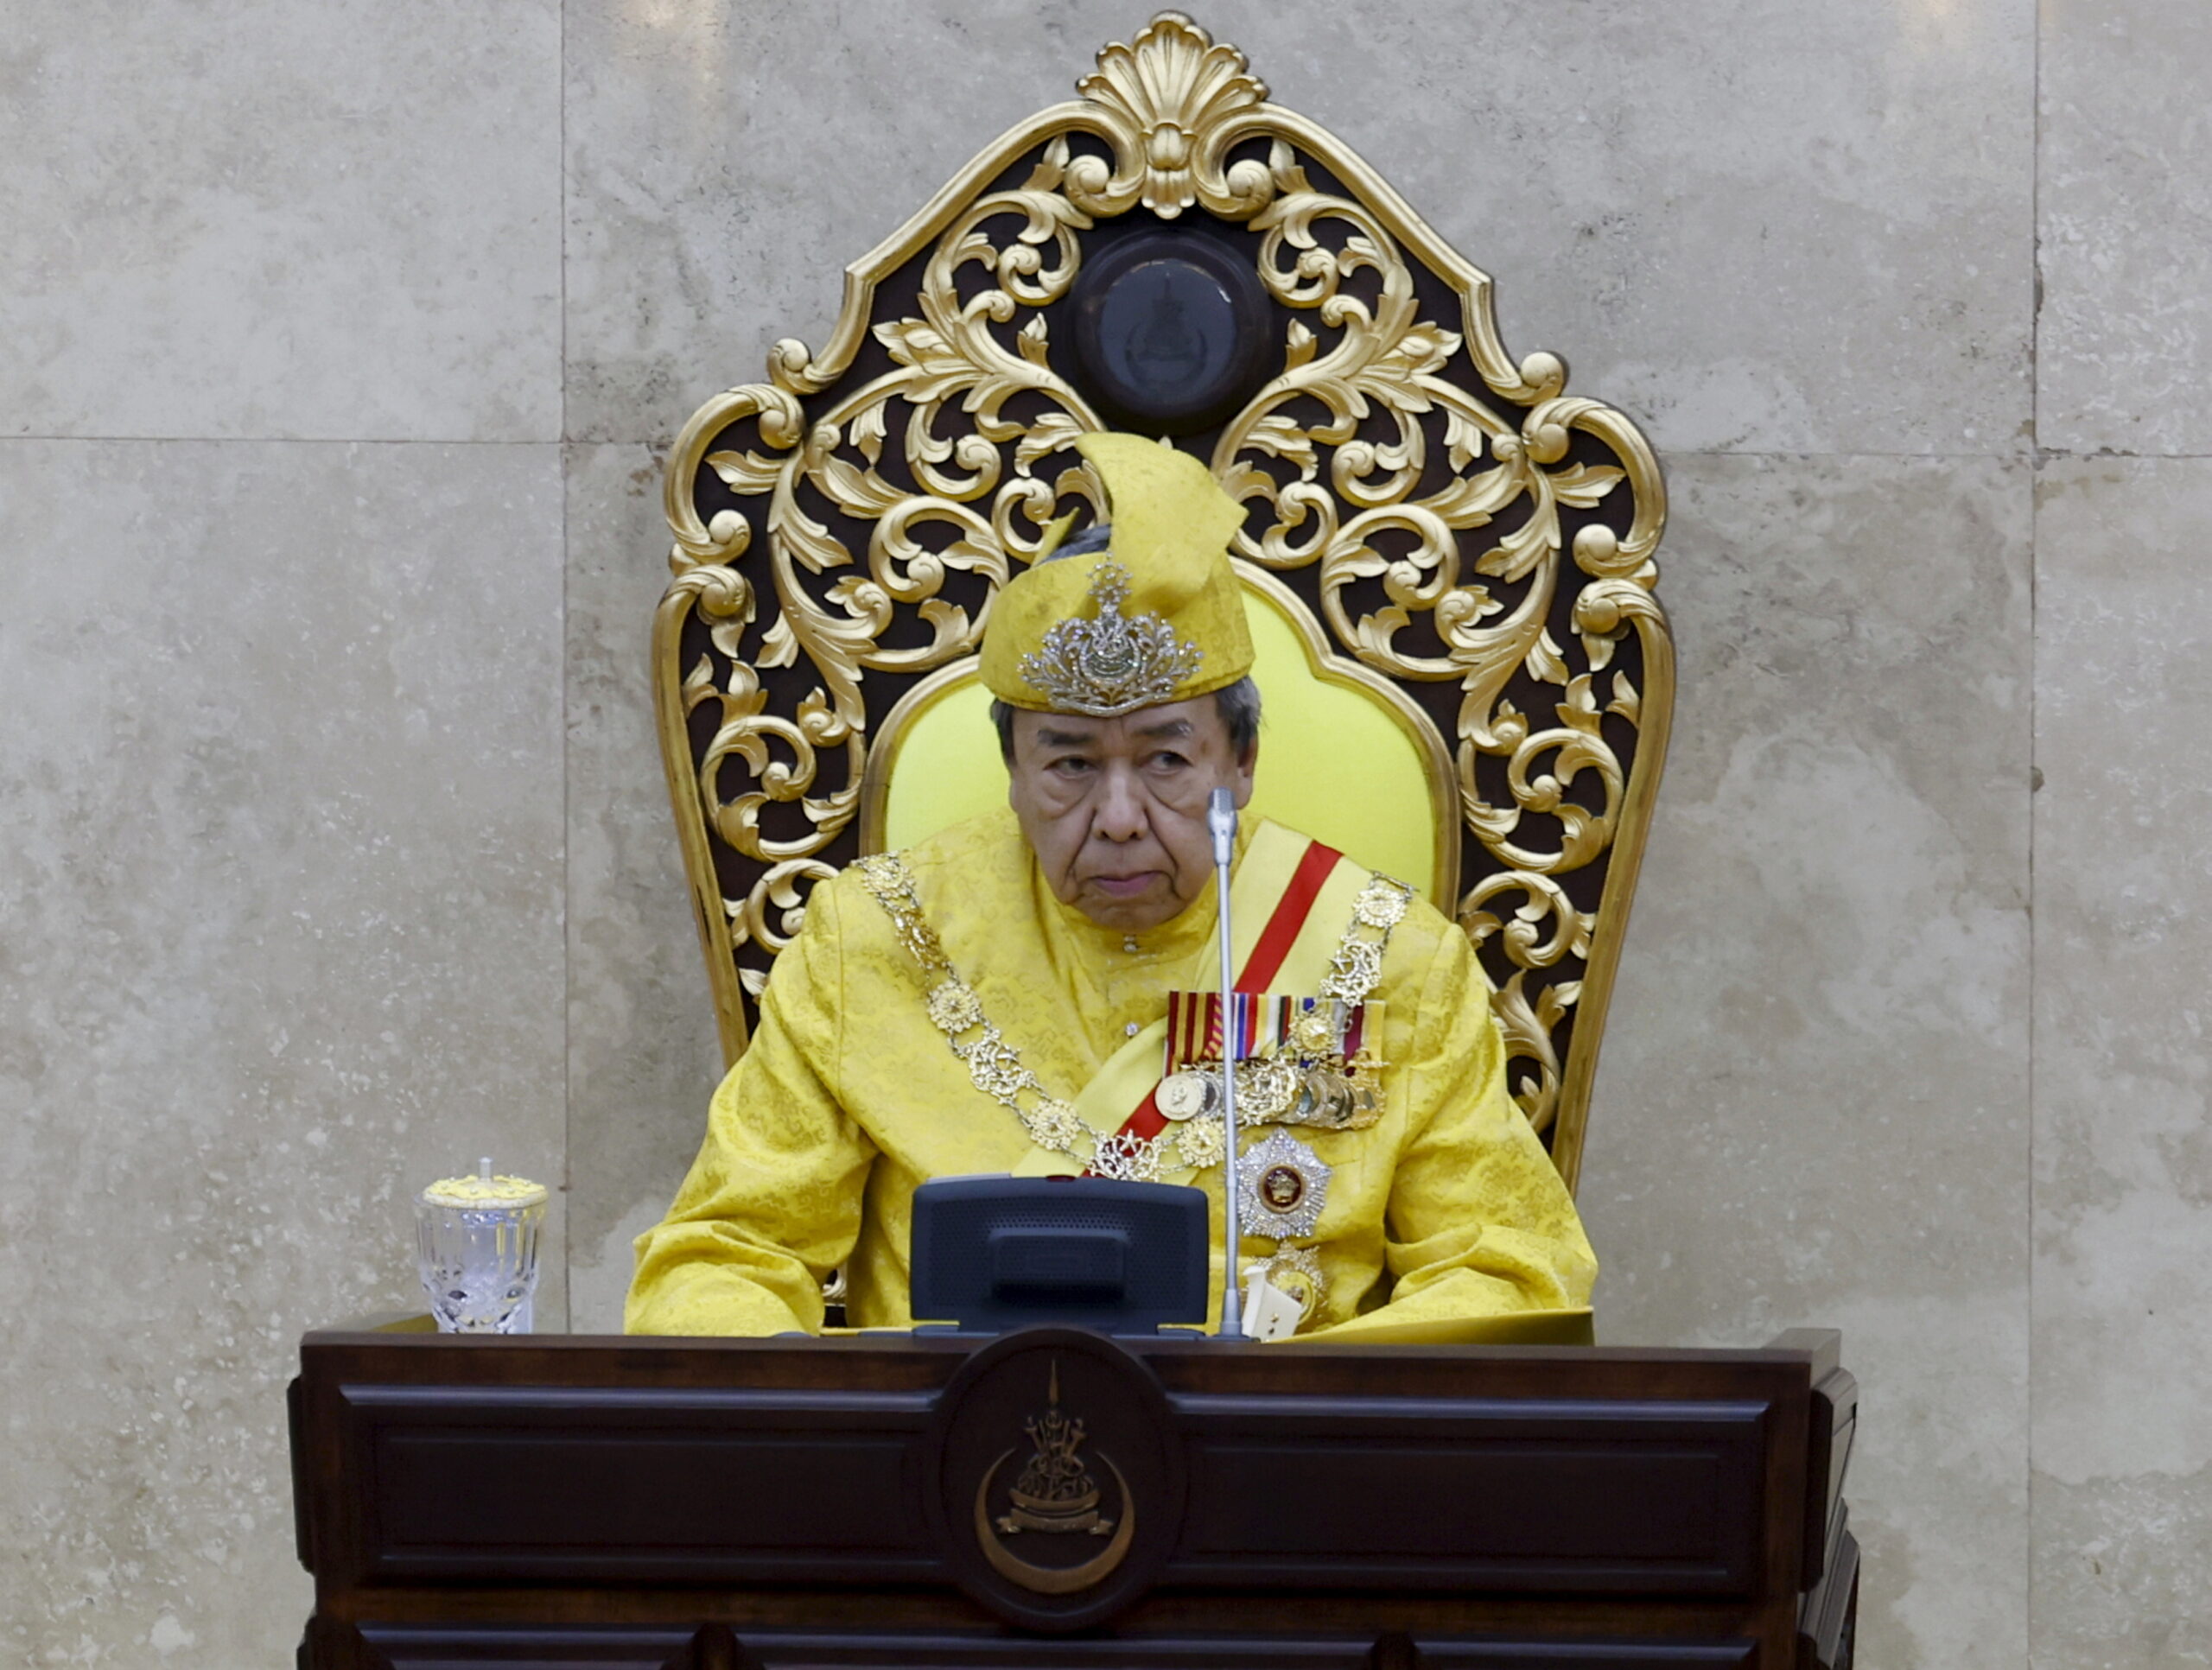 Royal rebuke for Hadi: Selangor Sultan disappointed with PAS president for insulting Federal Constitution, rulers